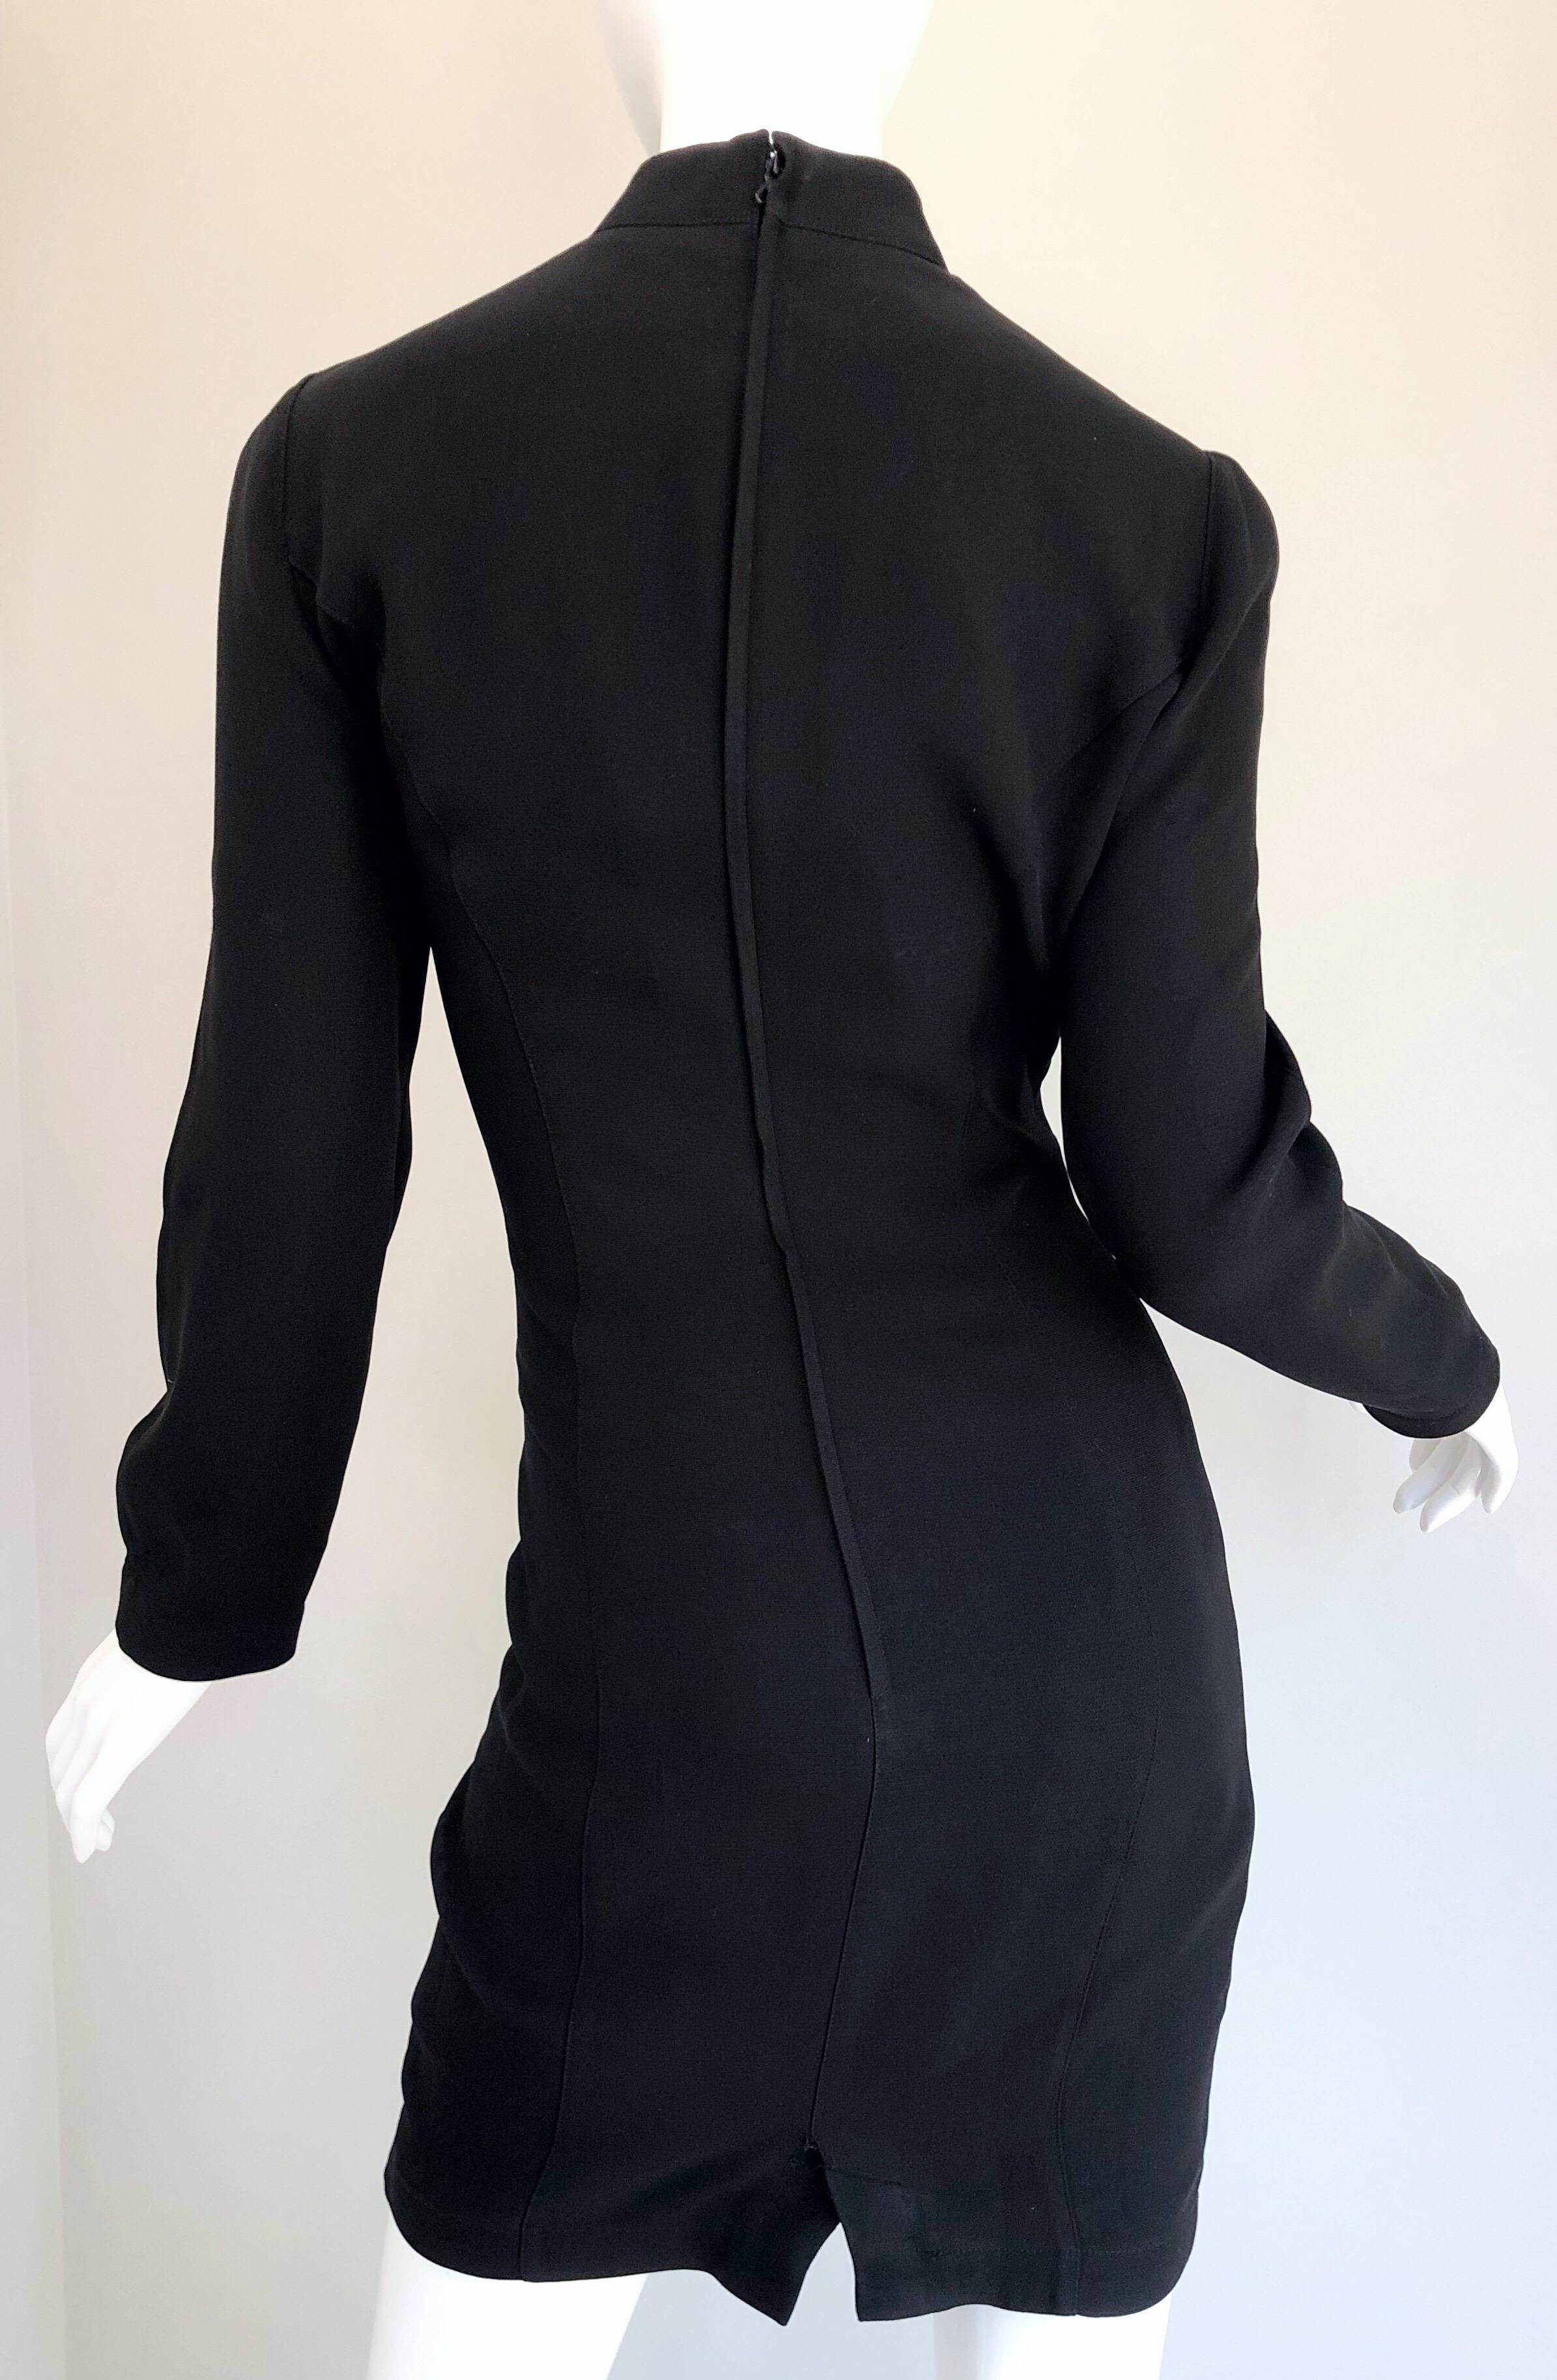 Iconic Vintage Thierry Mugler 80s Bondage Inspired Cut - Out Black 1980s Dress For Sale 4